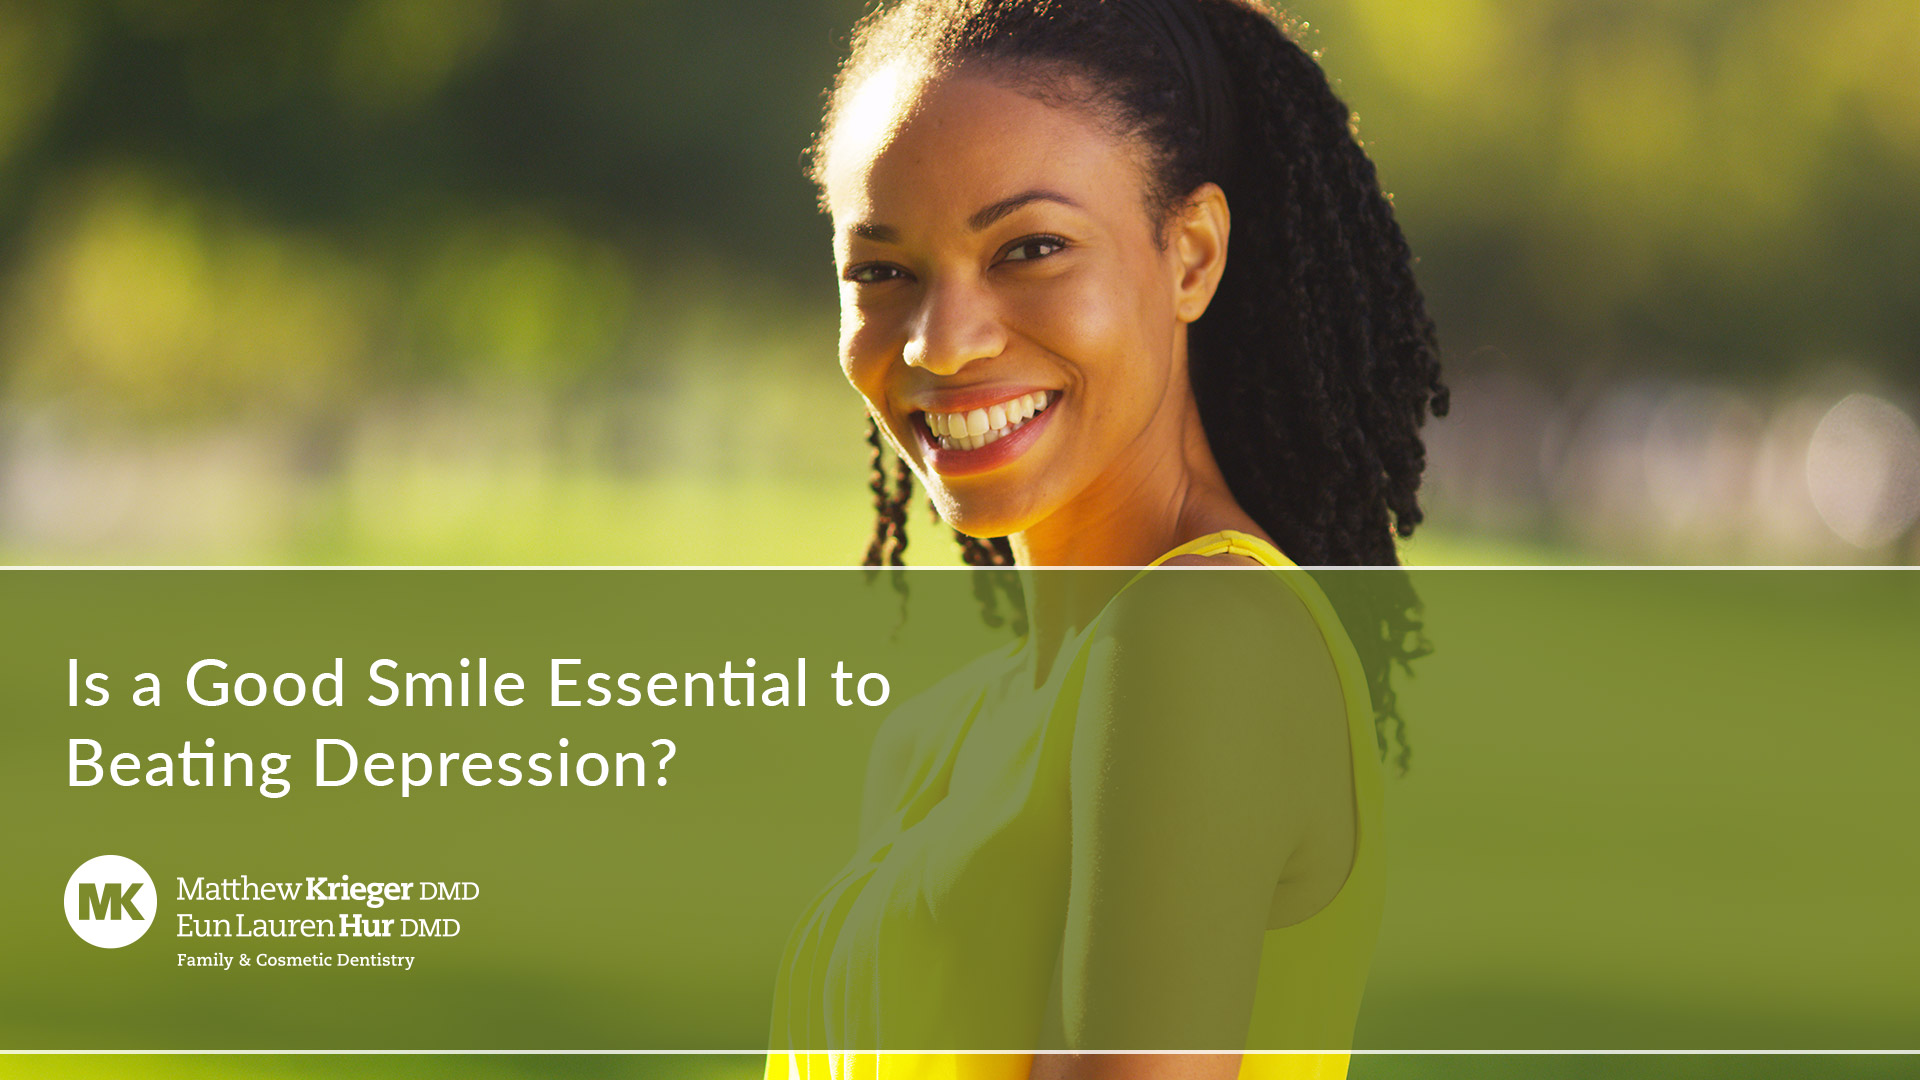 Is a Good Smile Essential to Beating Depression? - Matthew Krieger DMD